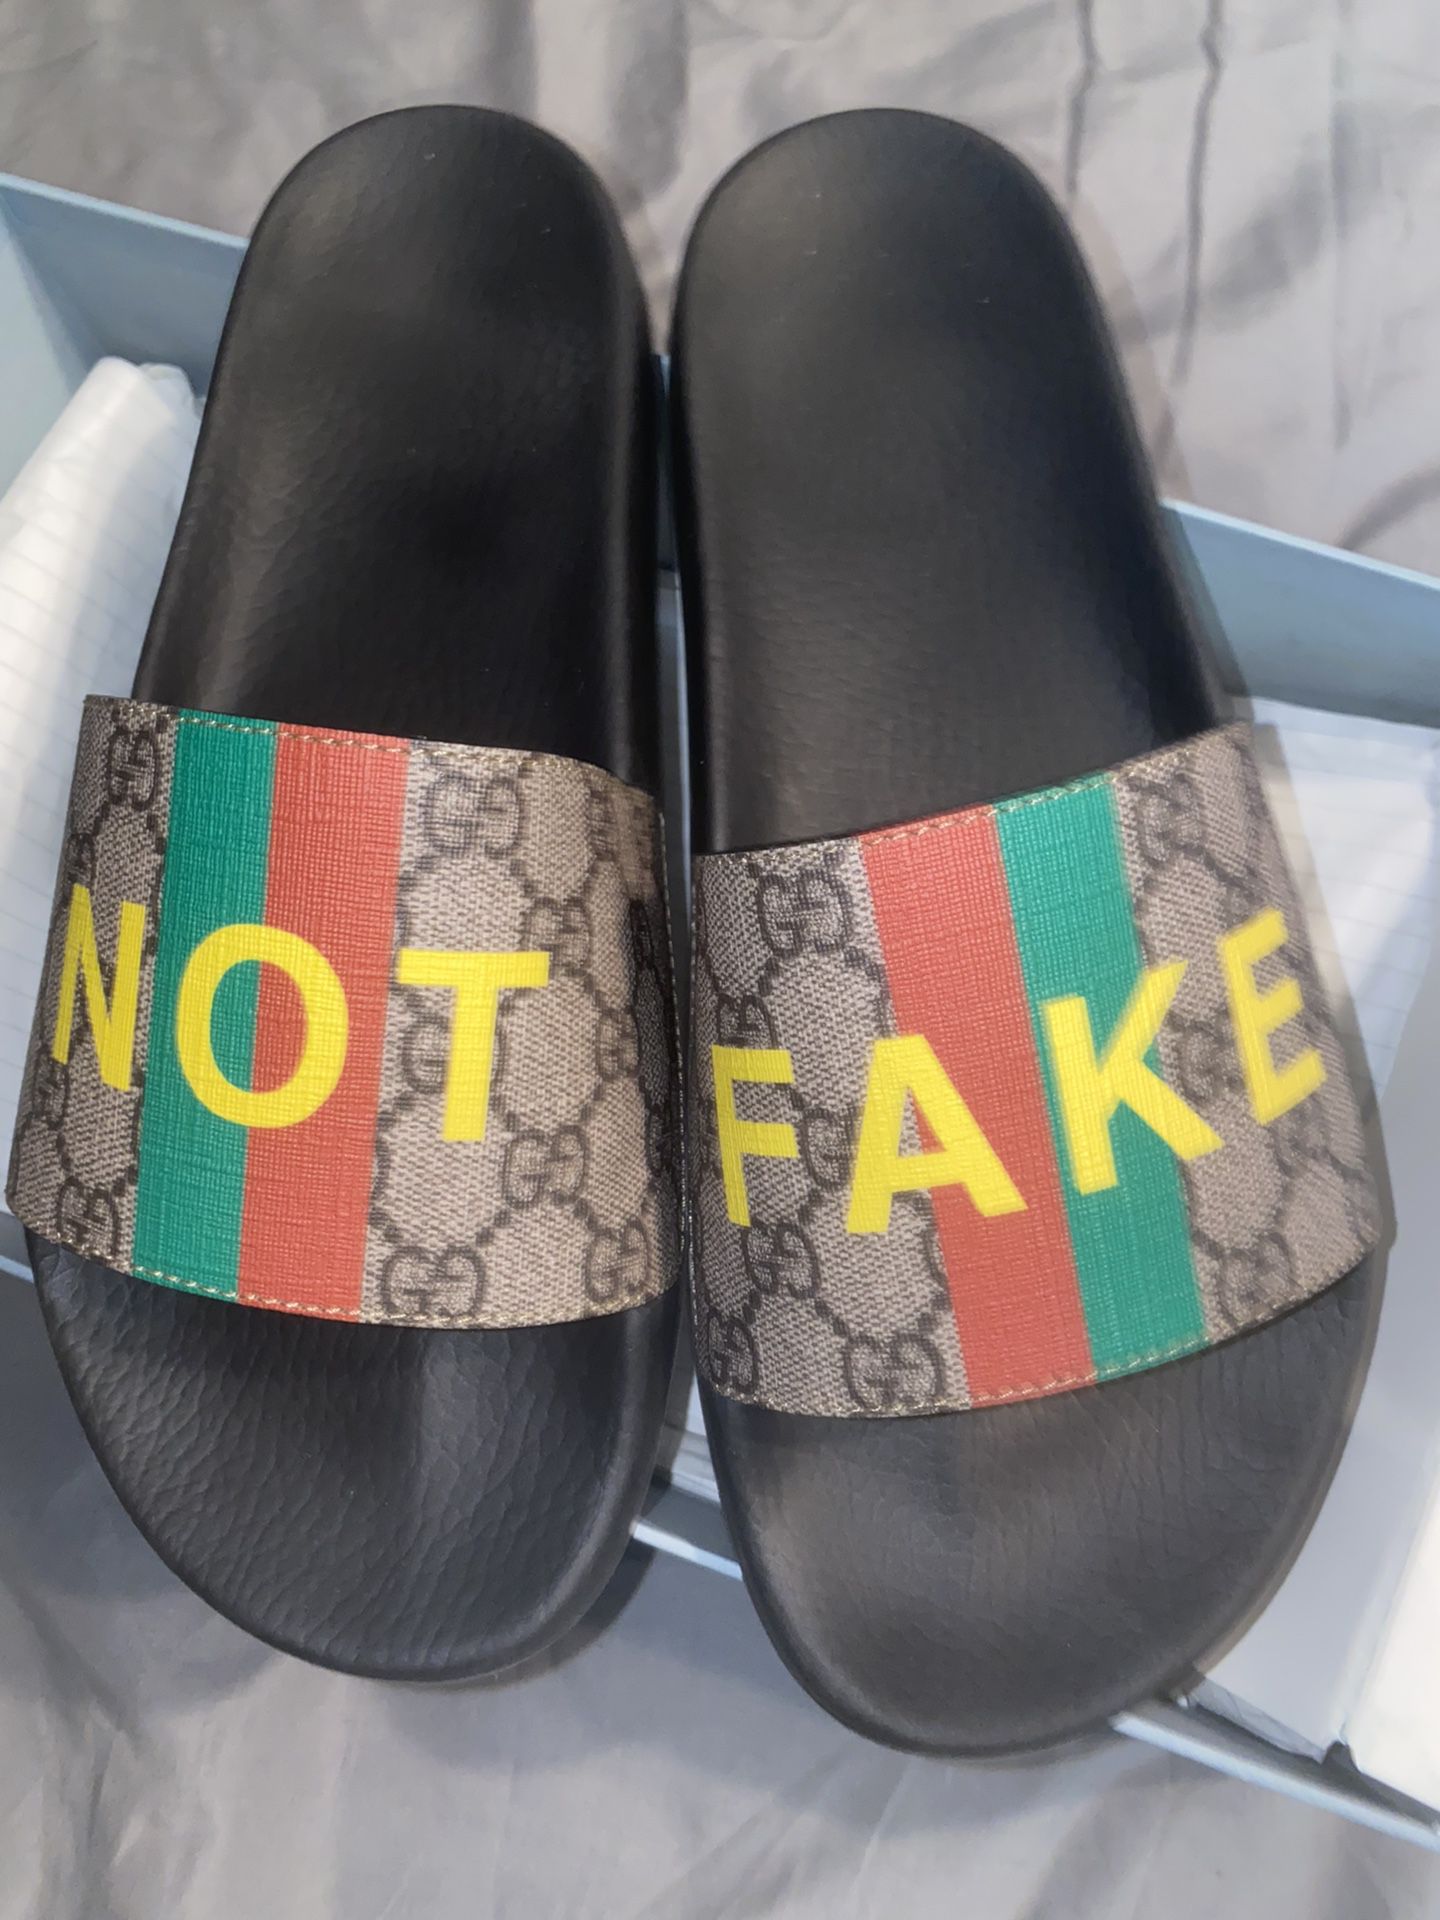 Gucci Not fake Slides Size 9 for Sale in Miami, FL - OfferUp